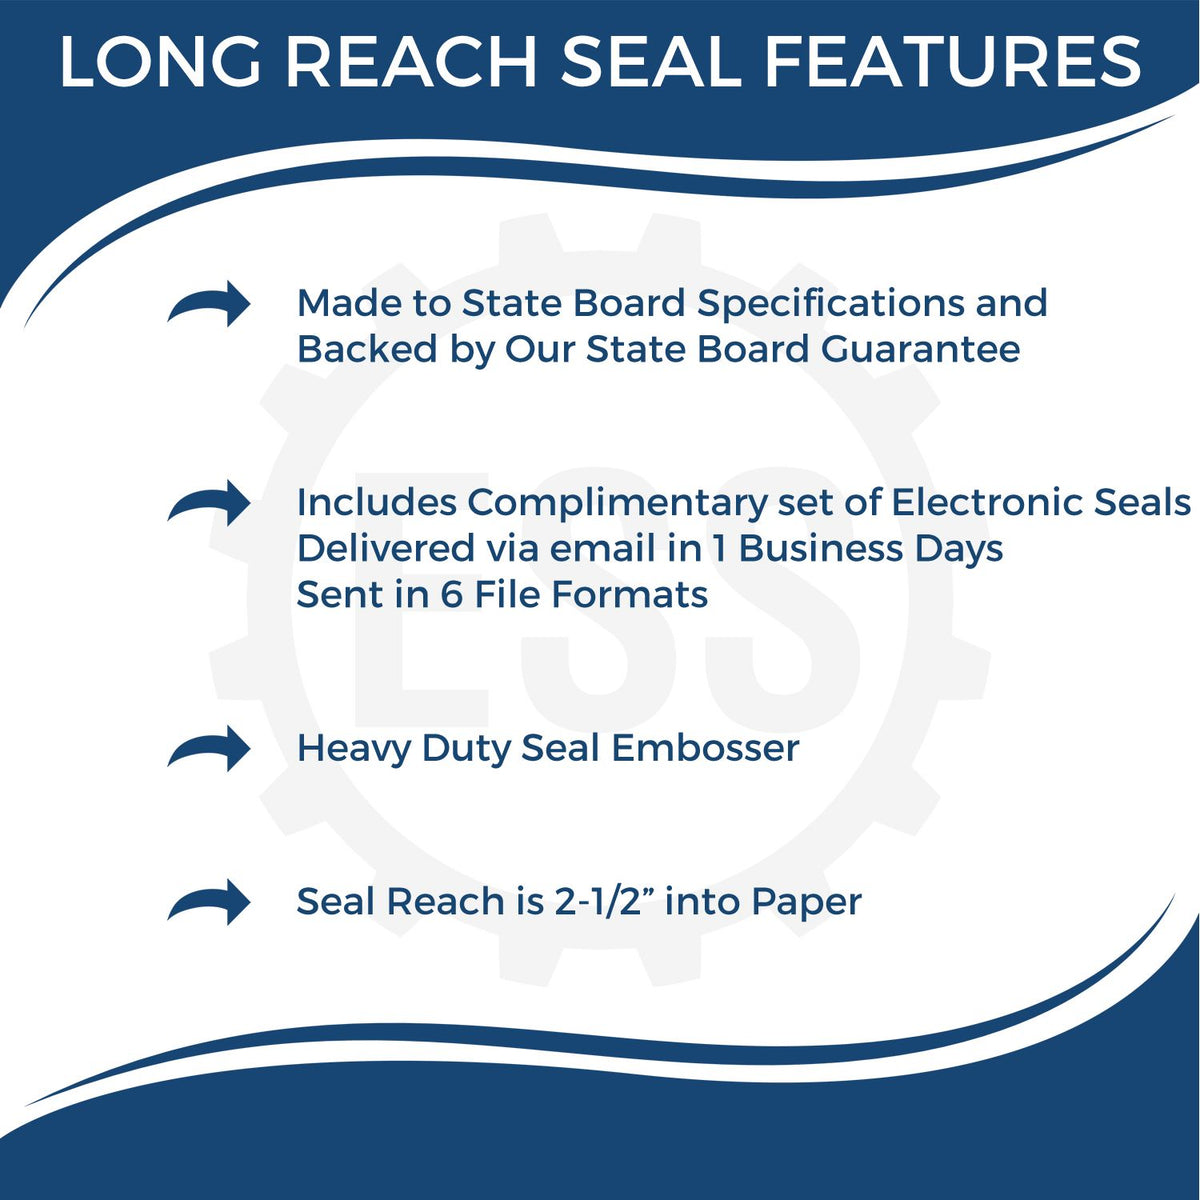 A picture of an infographic highlighting the selling points for the Long Reach Michigan Land Surveyor Seal